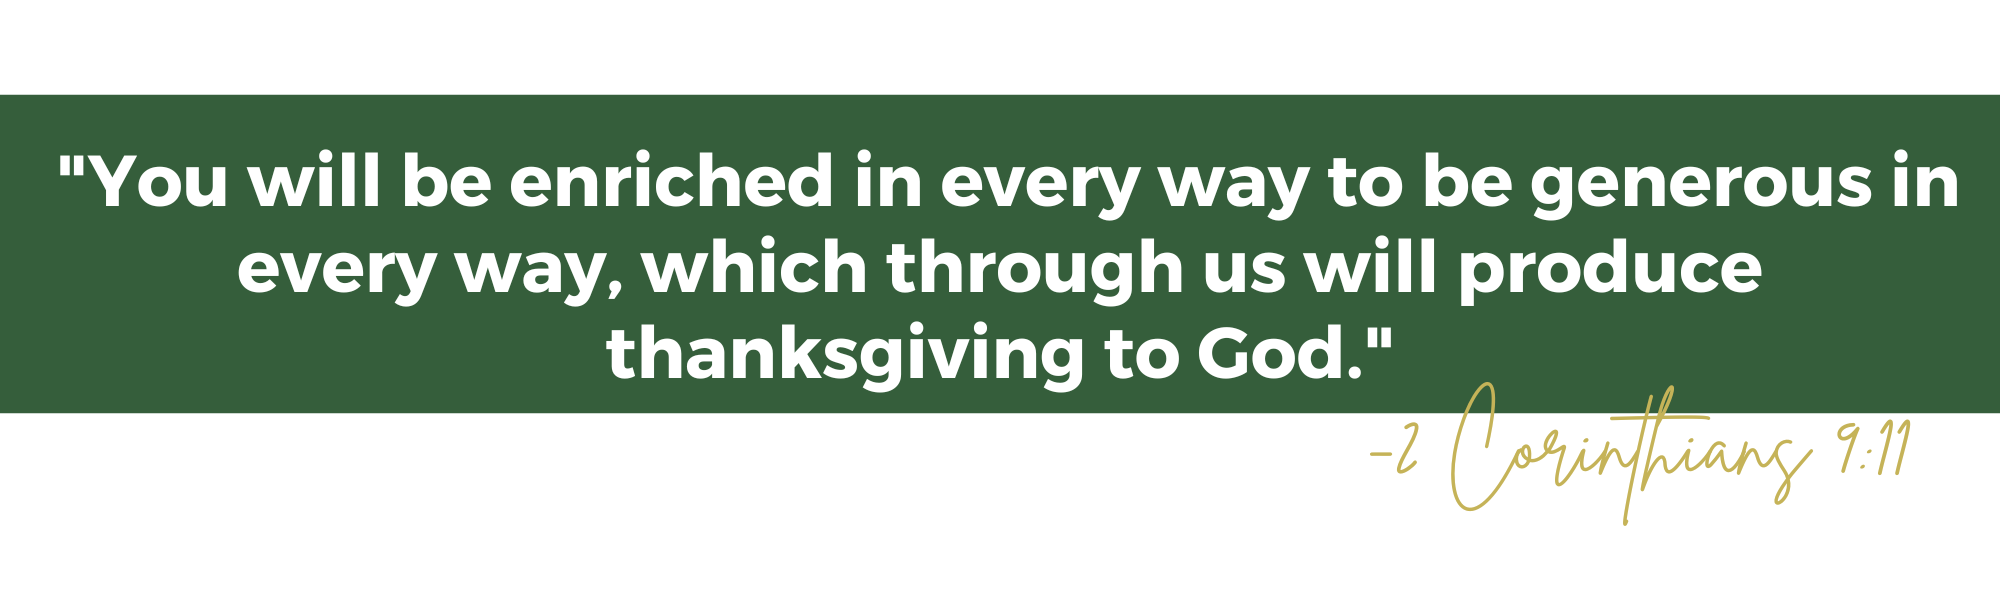  "You will be enriched in every way to be generous in every way, which through us will produce thanksgiving to God."